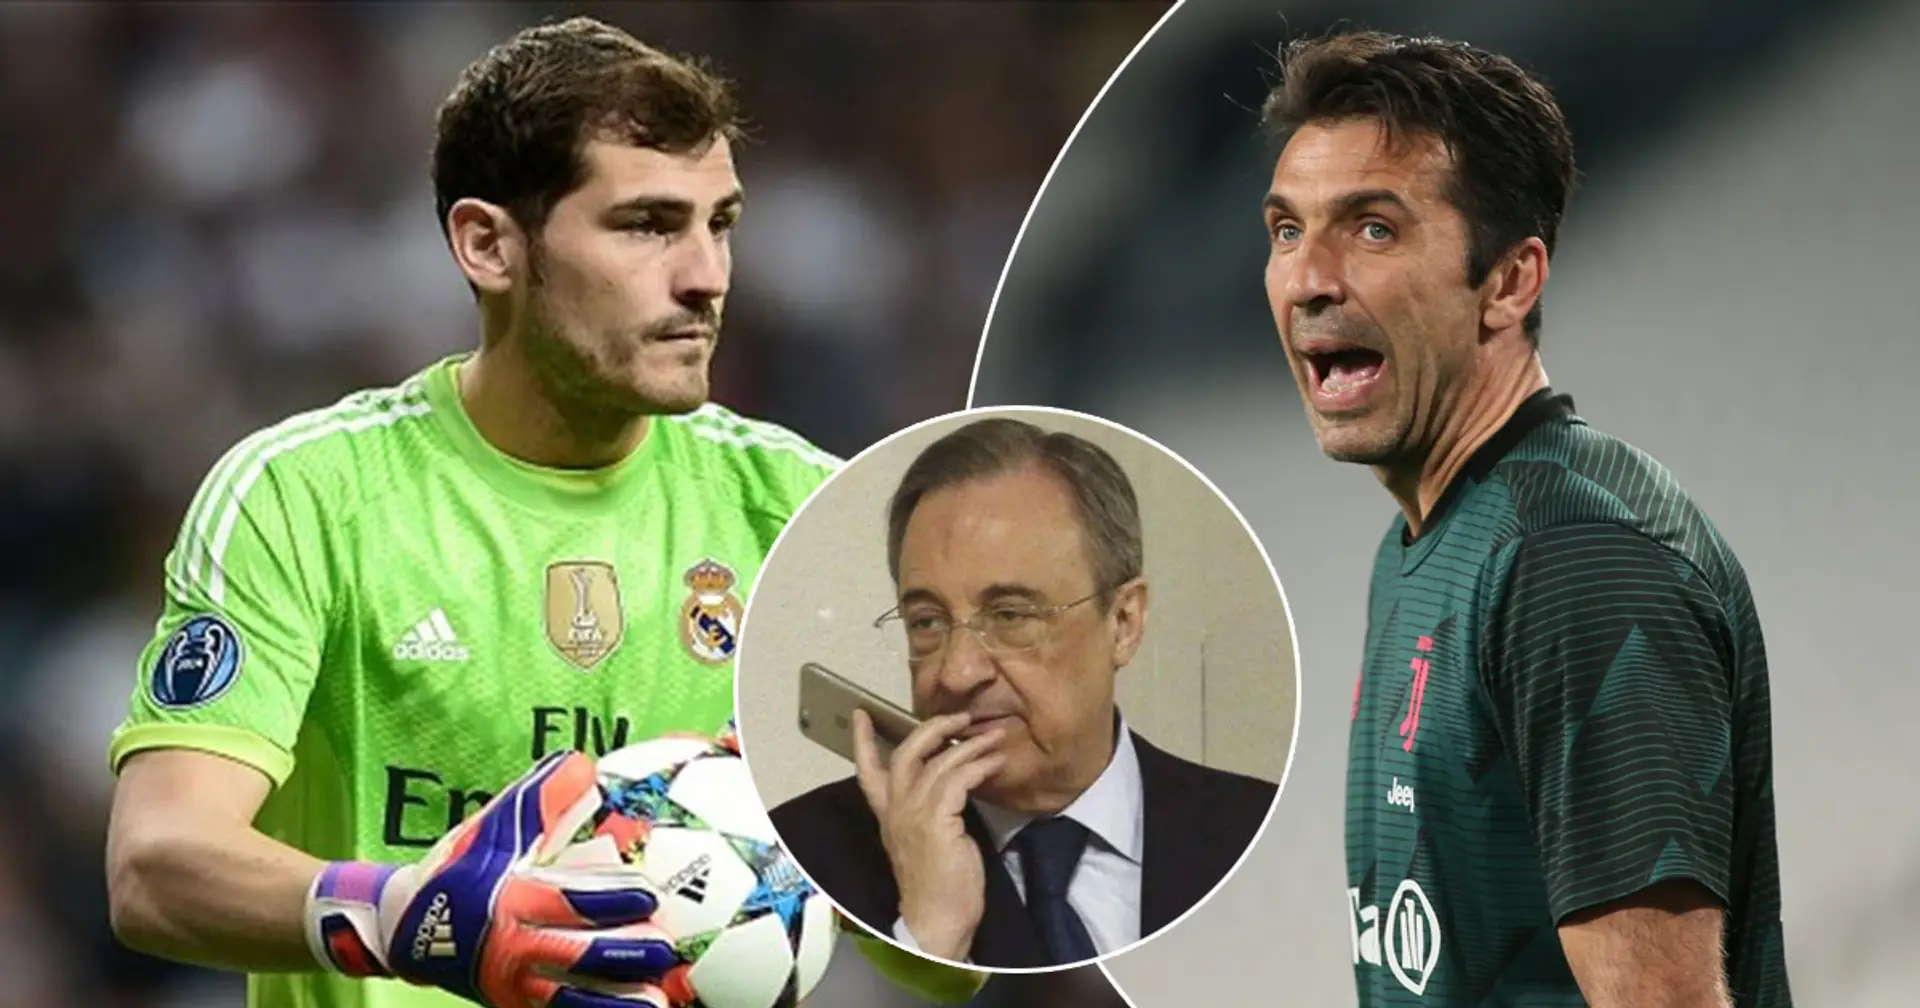 'Casillas is not a goalkeeper for Madrid. I would sign Buffon': new parts of Perez 2006 audio leaked